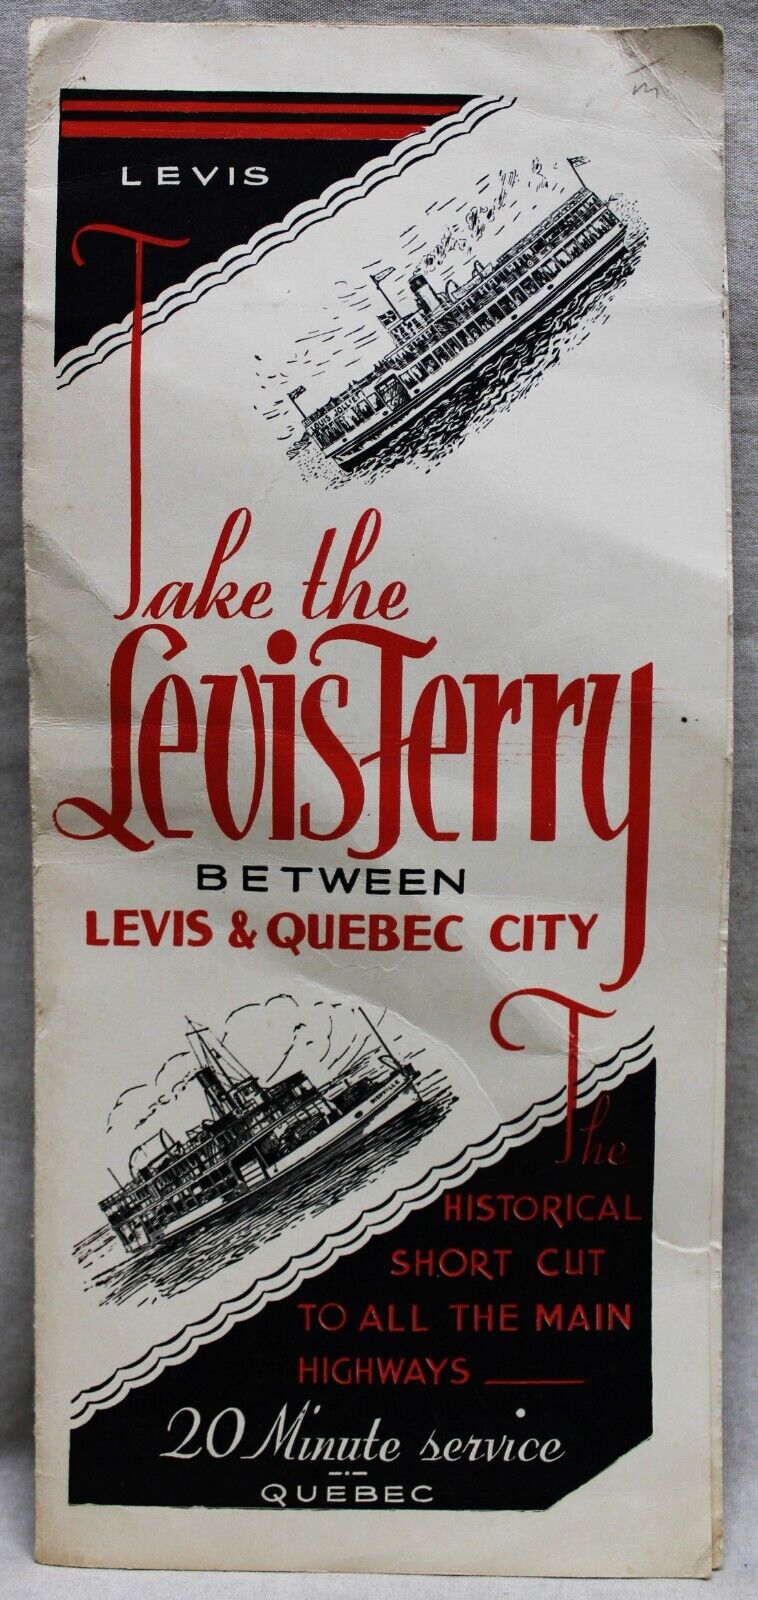 LEVIS QUEBEC CITY CANADA ST LAWRENCE RIVER FERRY CROSSING BROCHURE 1930s VINTAGE